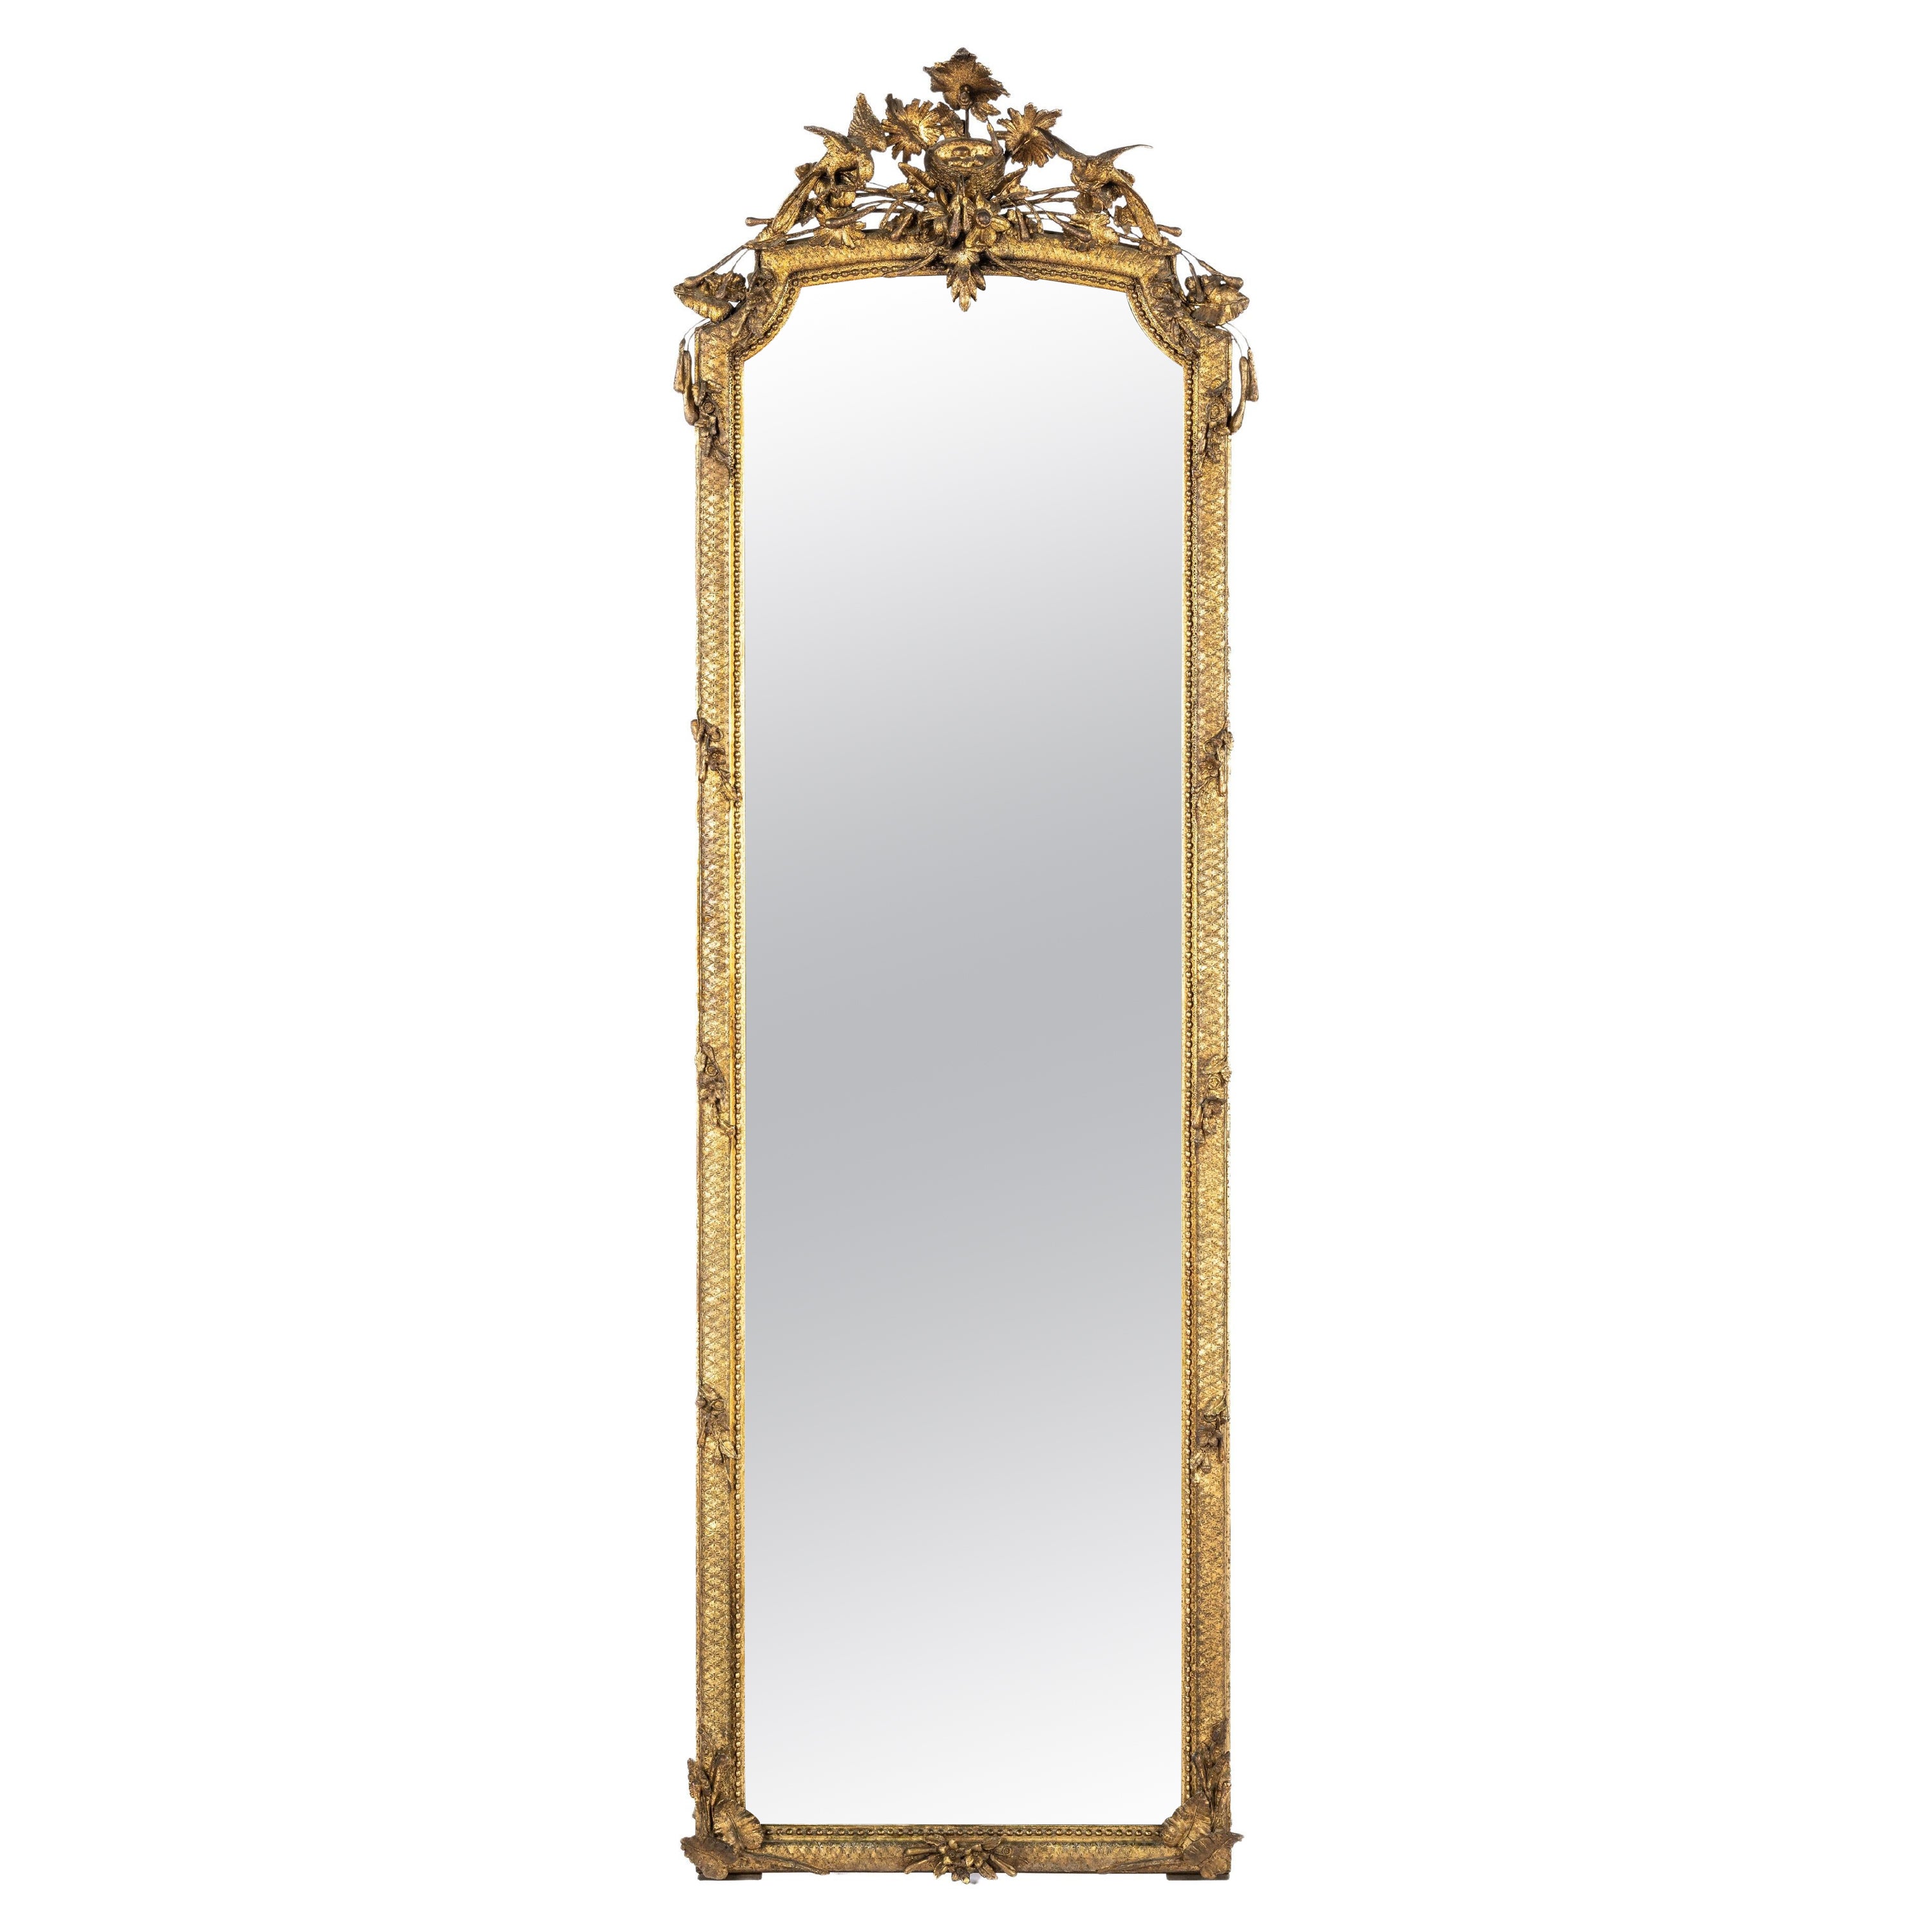 Gilt Pier Mirrors and Console Mirrors